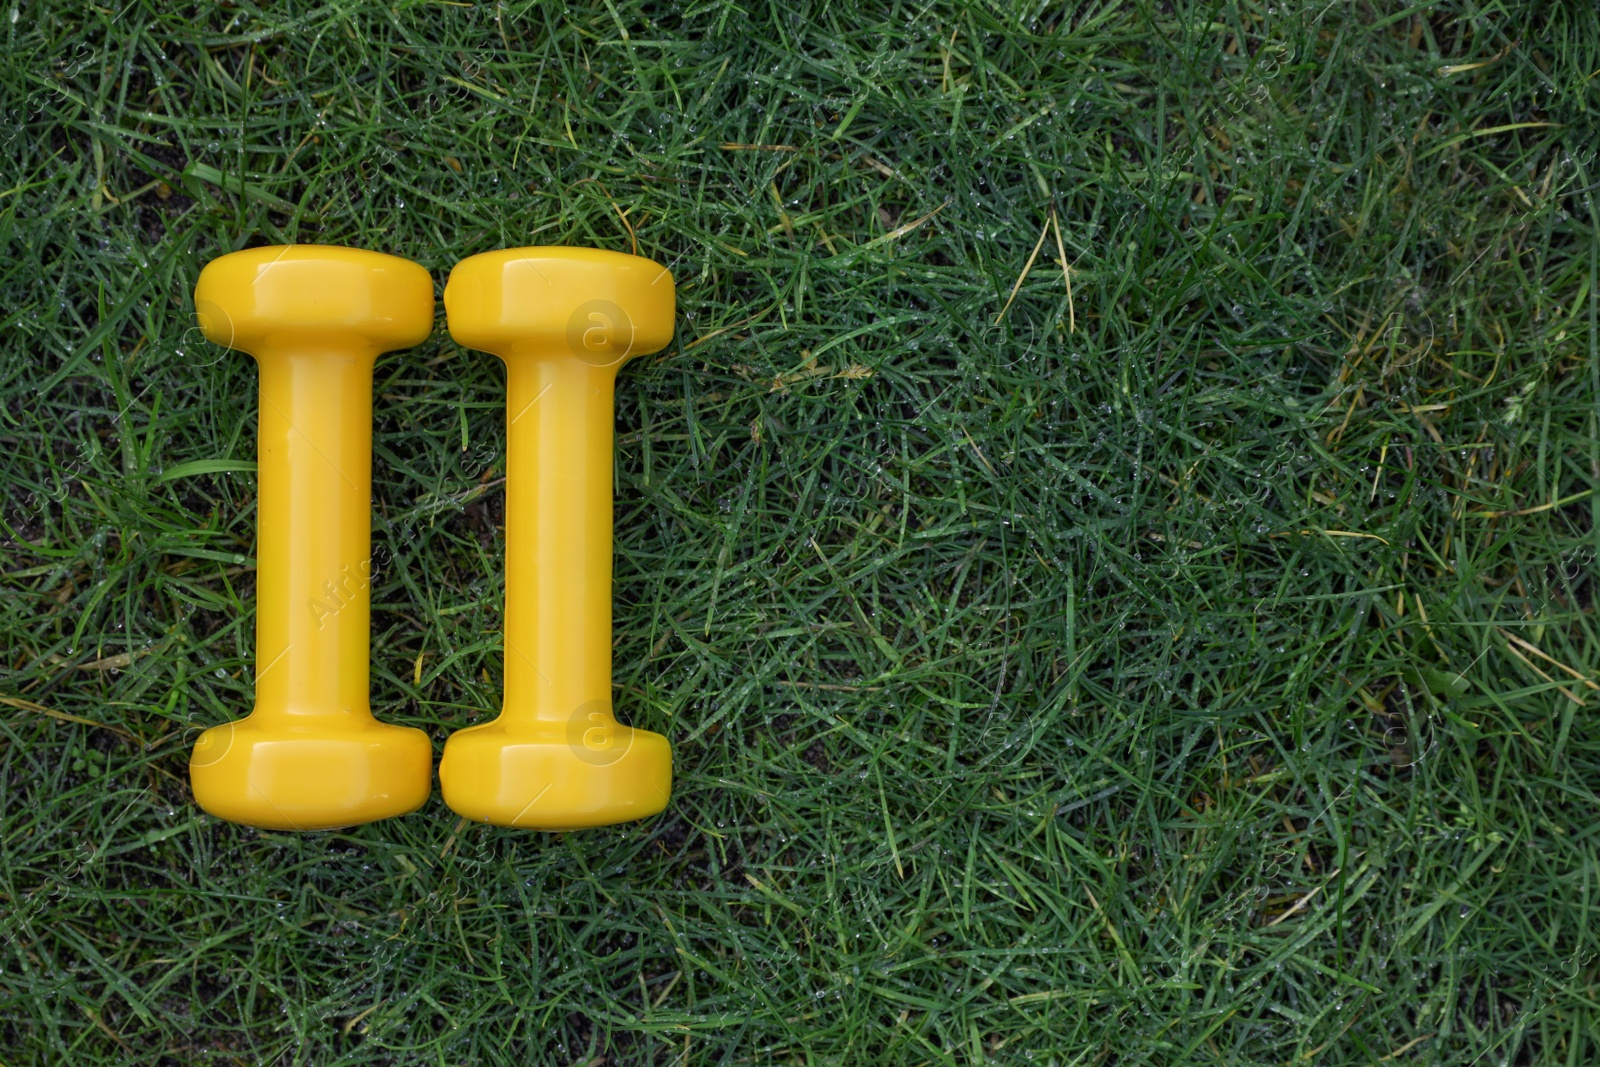 Photo of Yellow dumbbells on green grass, top view with space for text. Morning exercise